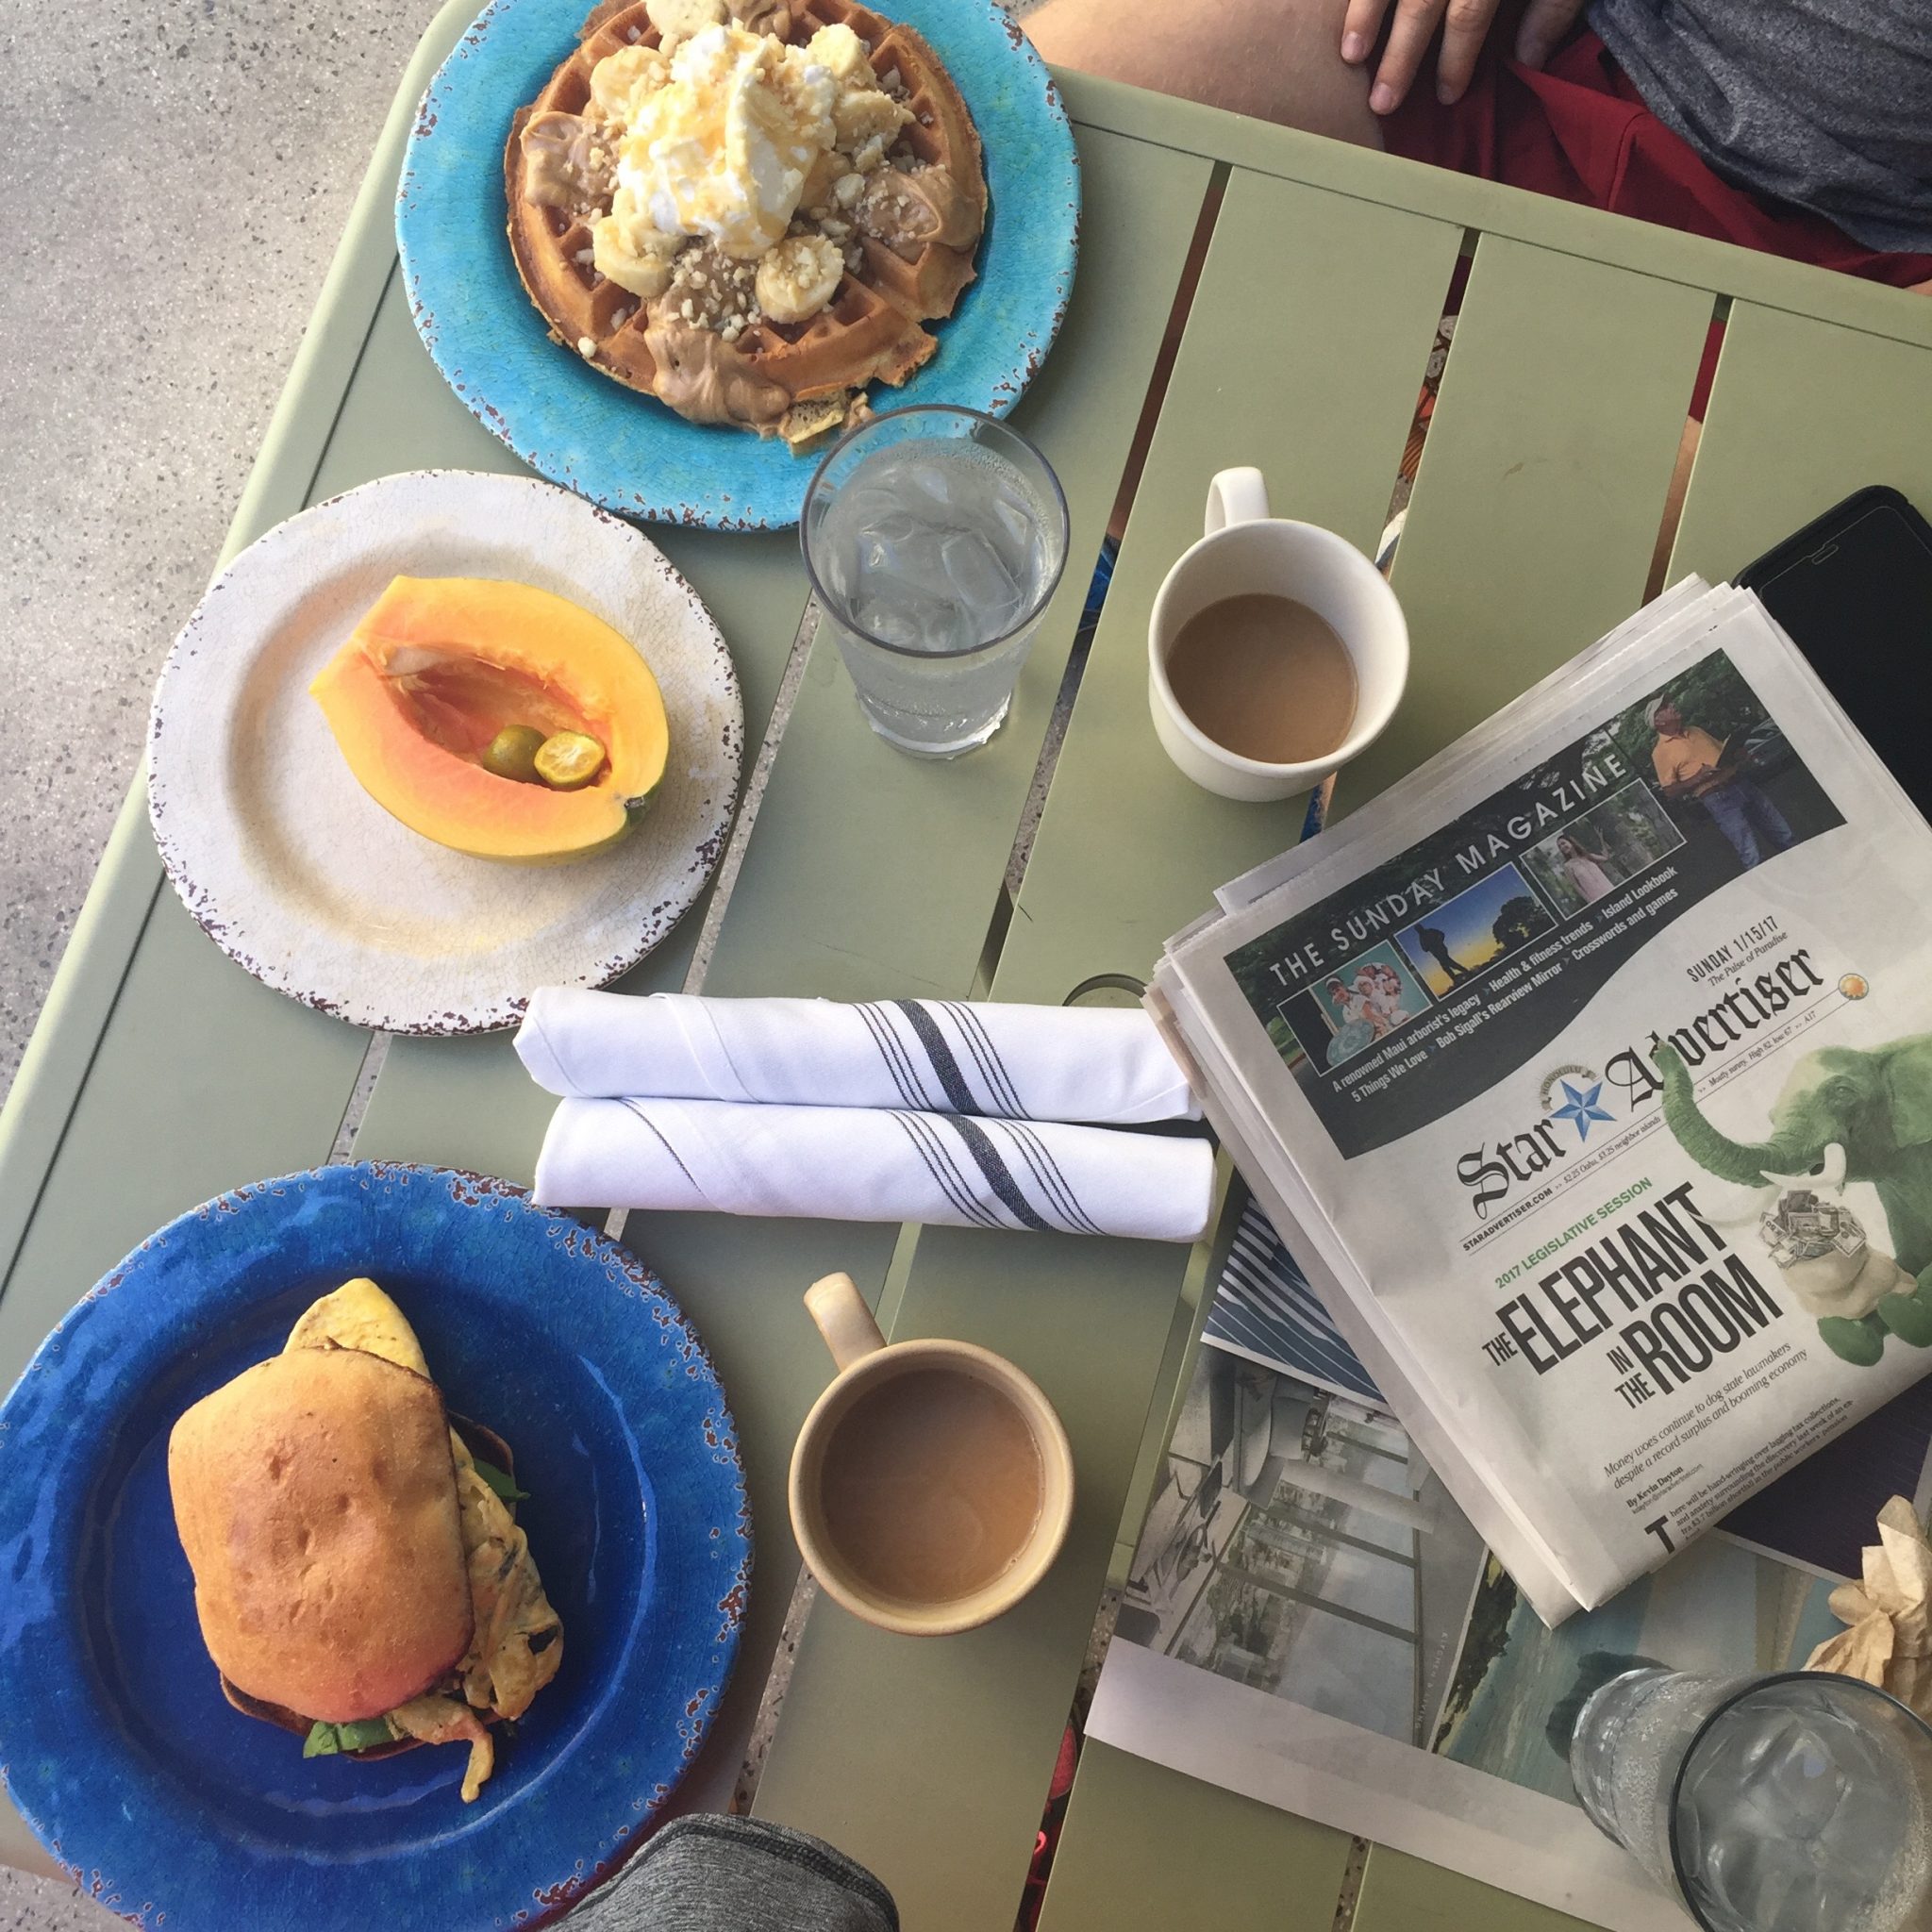 Best Brunch Spots Oahu - Whether you're craving french toast or acai bowls, these are the best spots for brunch on the Hawaiian Island of Oahu - CommuniKait